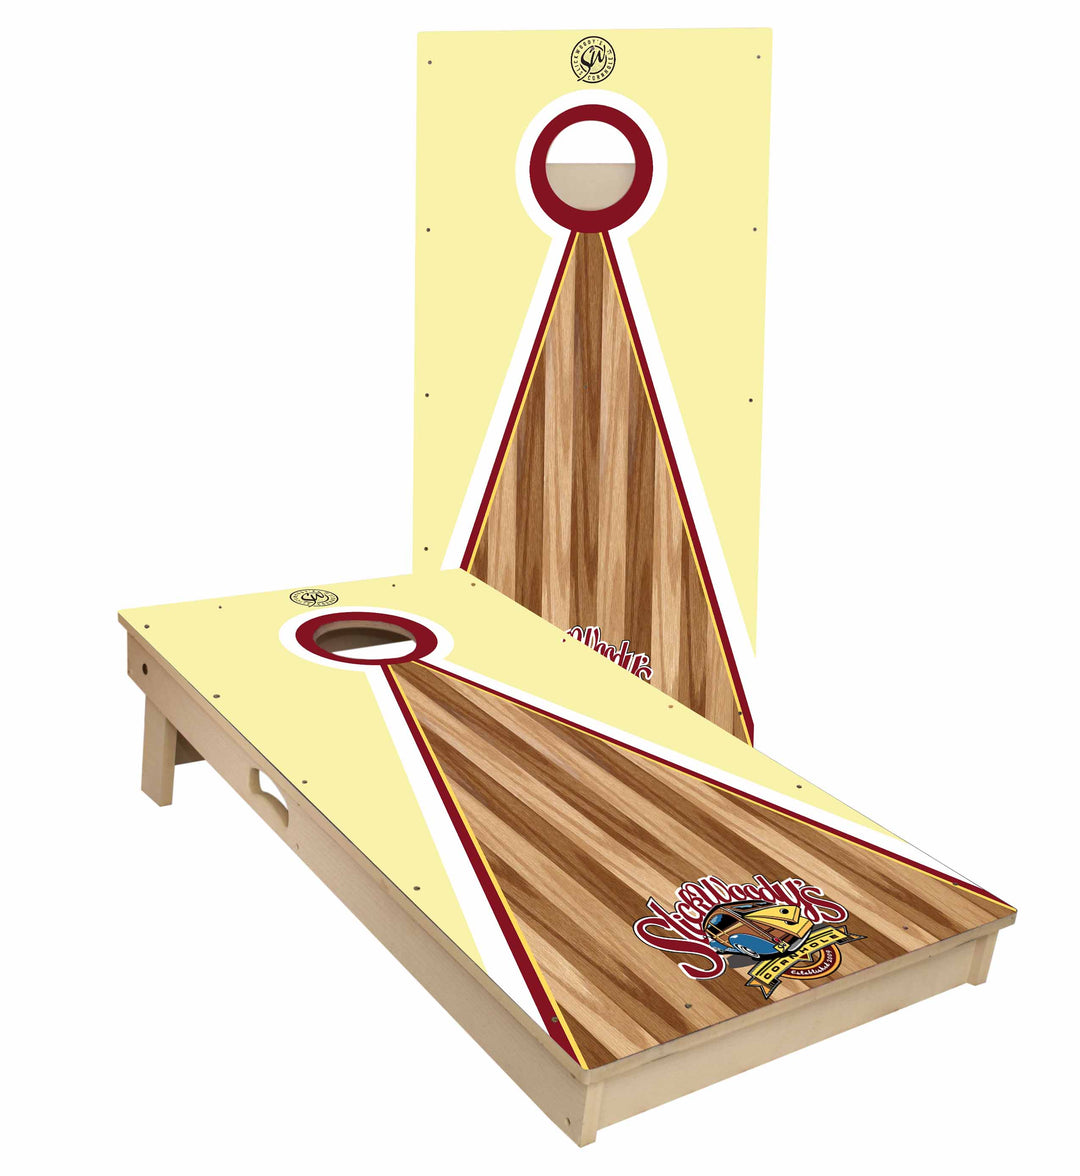 All Weather Cornhole Boards: Benefits, Performance, and Price